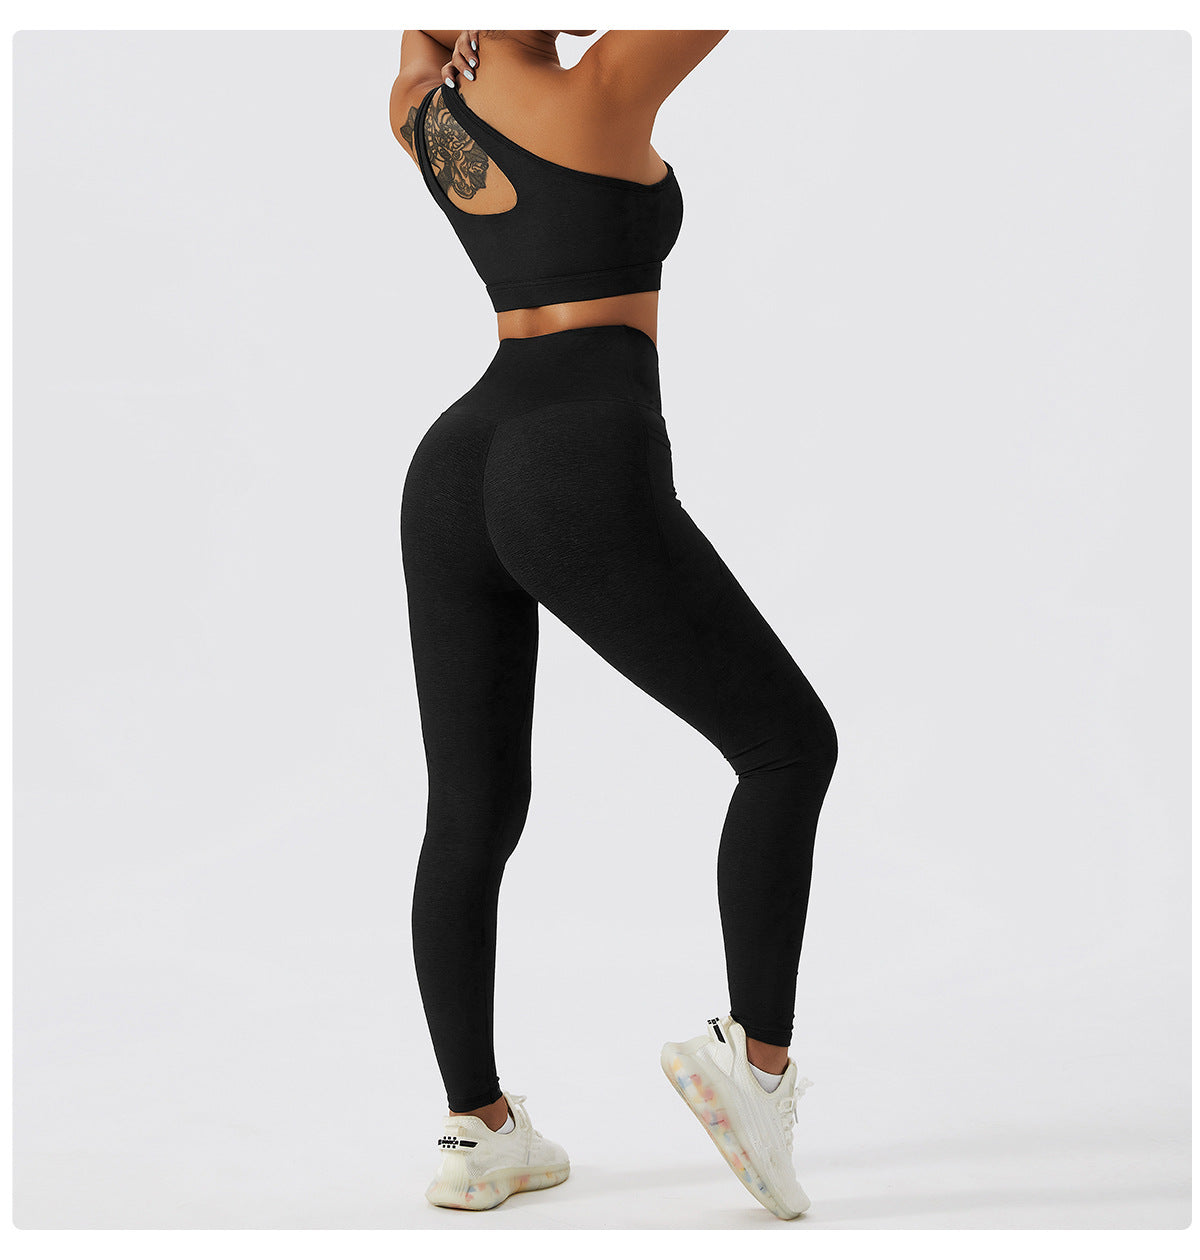 2023 Activewear Fashion Trends | Lilac Lavender One Shoulder Sports Bra and High Waist Leggings Gym Outfit 2-piece Set